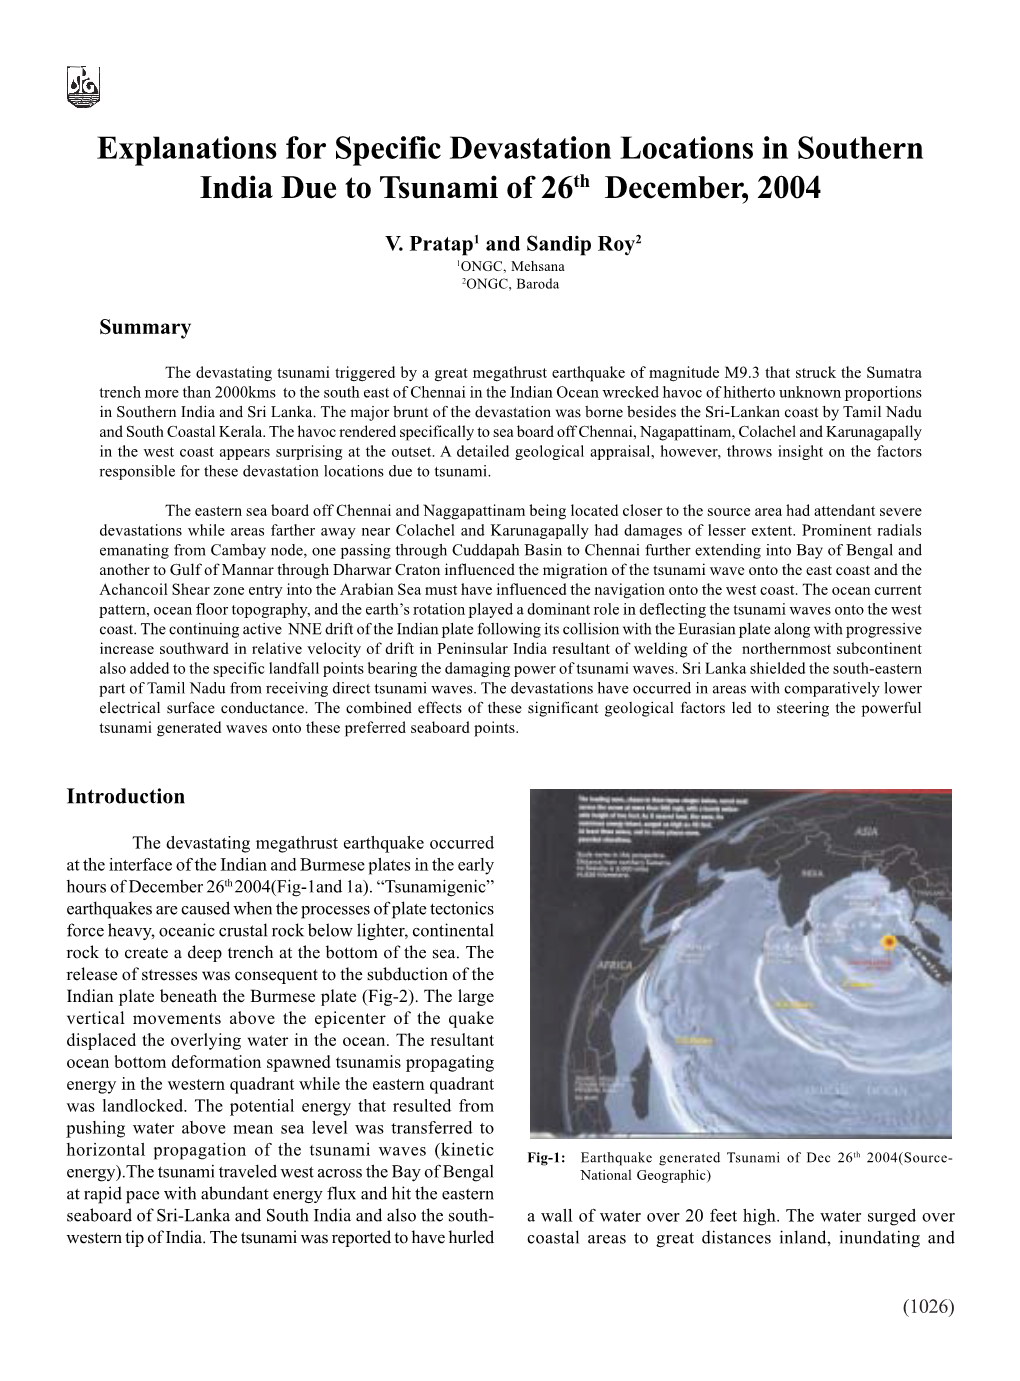 Explanations for Specific Devastation Locations in Southern India Due to Tsunami of 26Th December, 2004